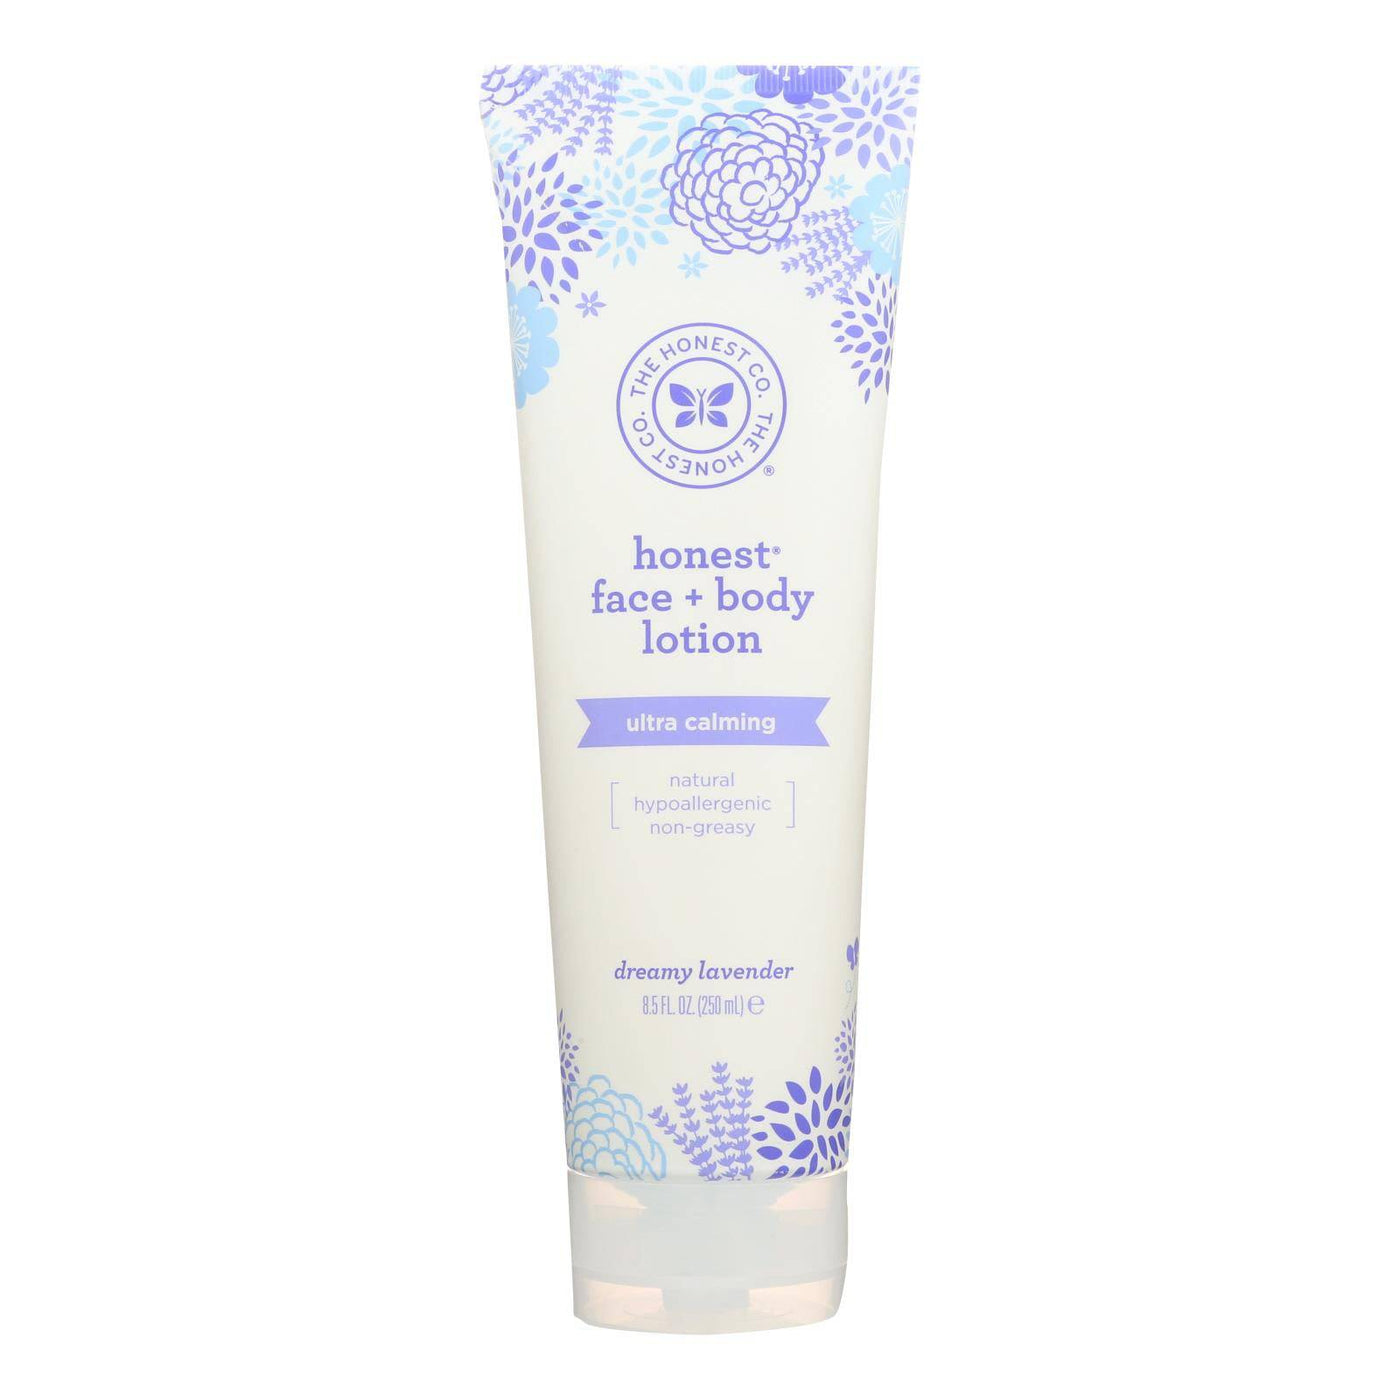 Buy The Honest Company Face And Body Lotion - Dreamy Lavender - 8.5 Fl Oz  at OnlyNaturals.us